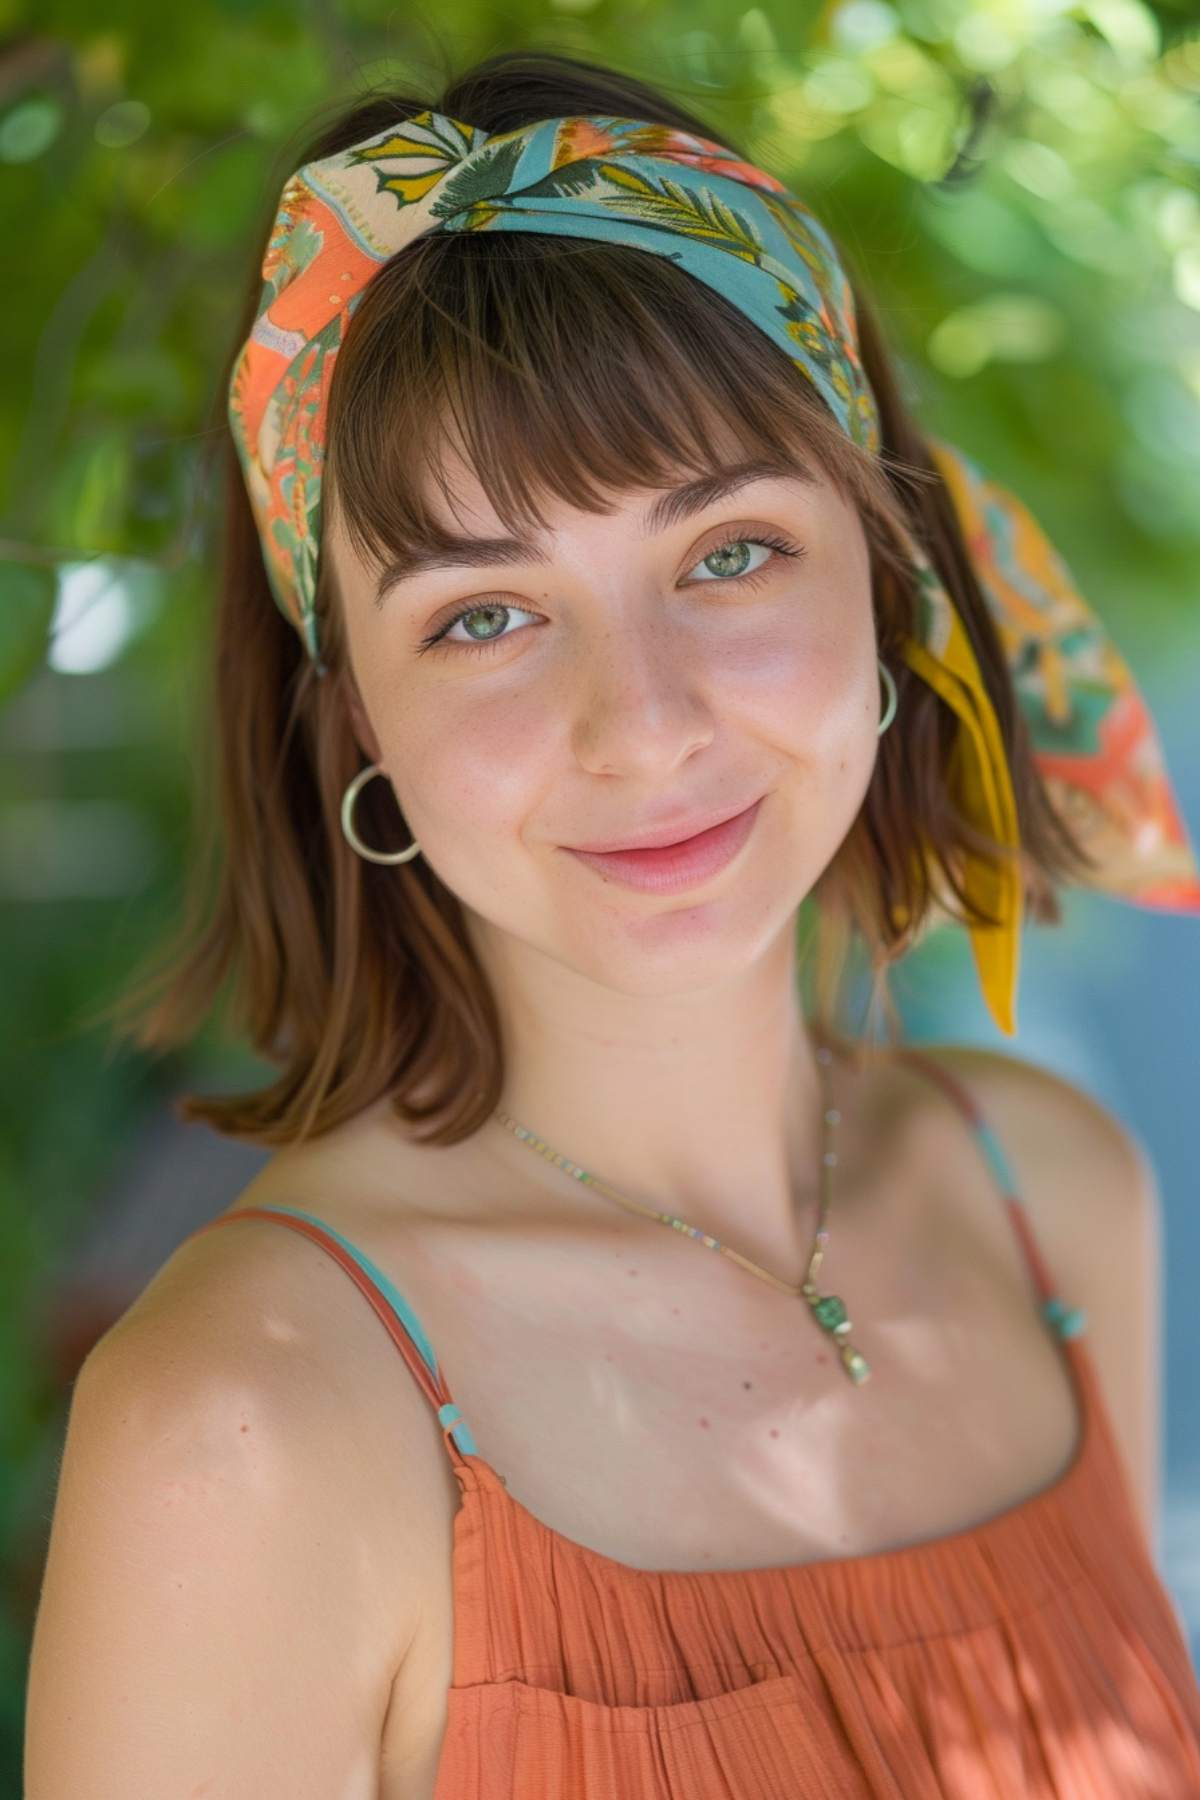 Cute summer hairstyle with headband and bangs